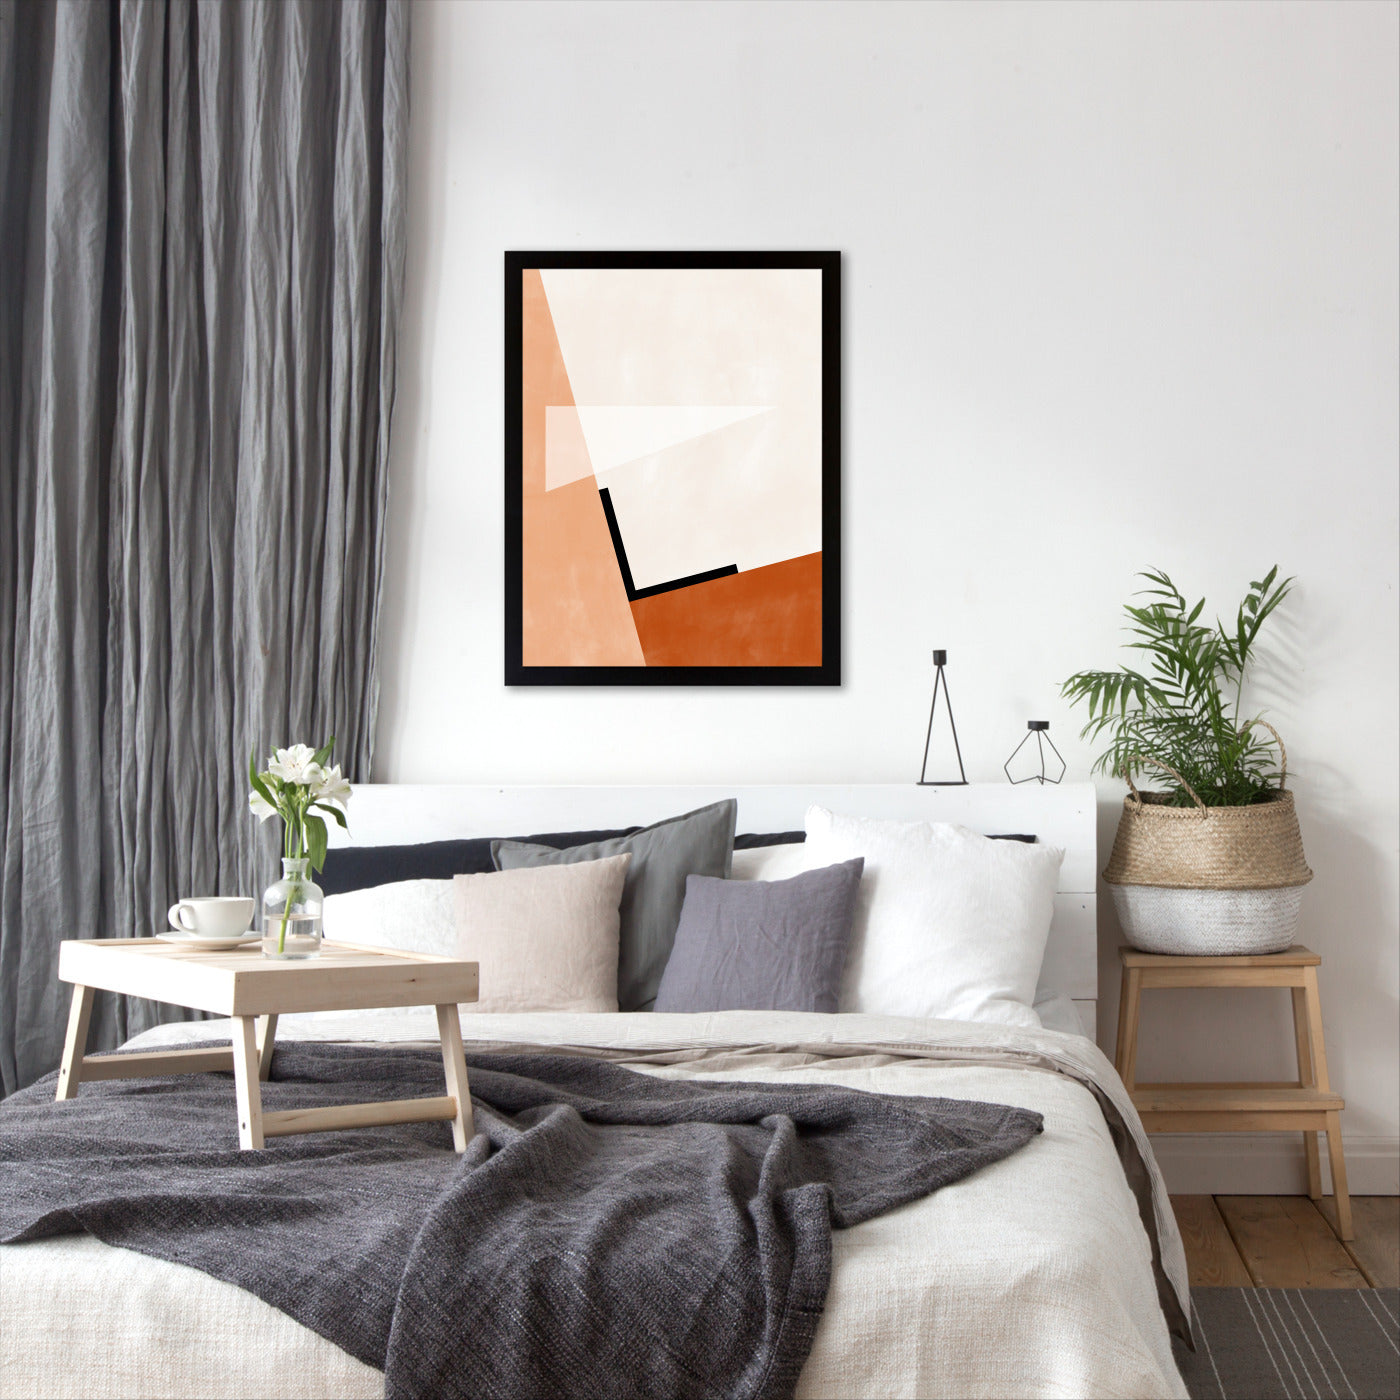 Terracotta Burnt Orange Abstract Shapes 5 by The Print Republic - Canvas, Poster or Framed Print